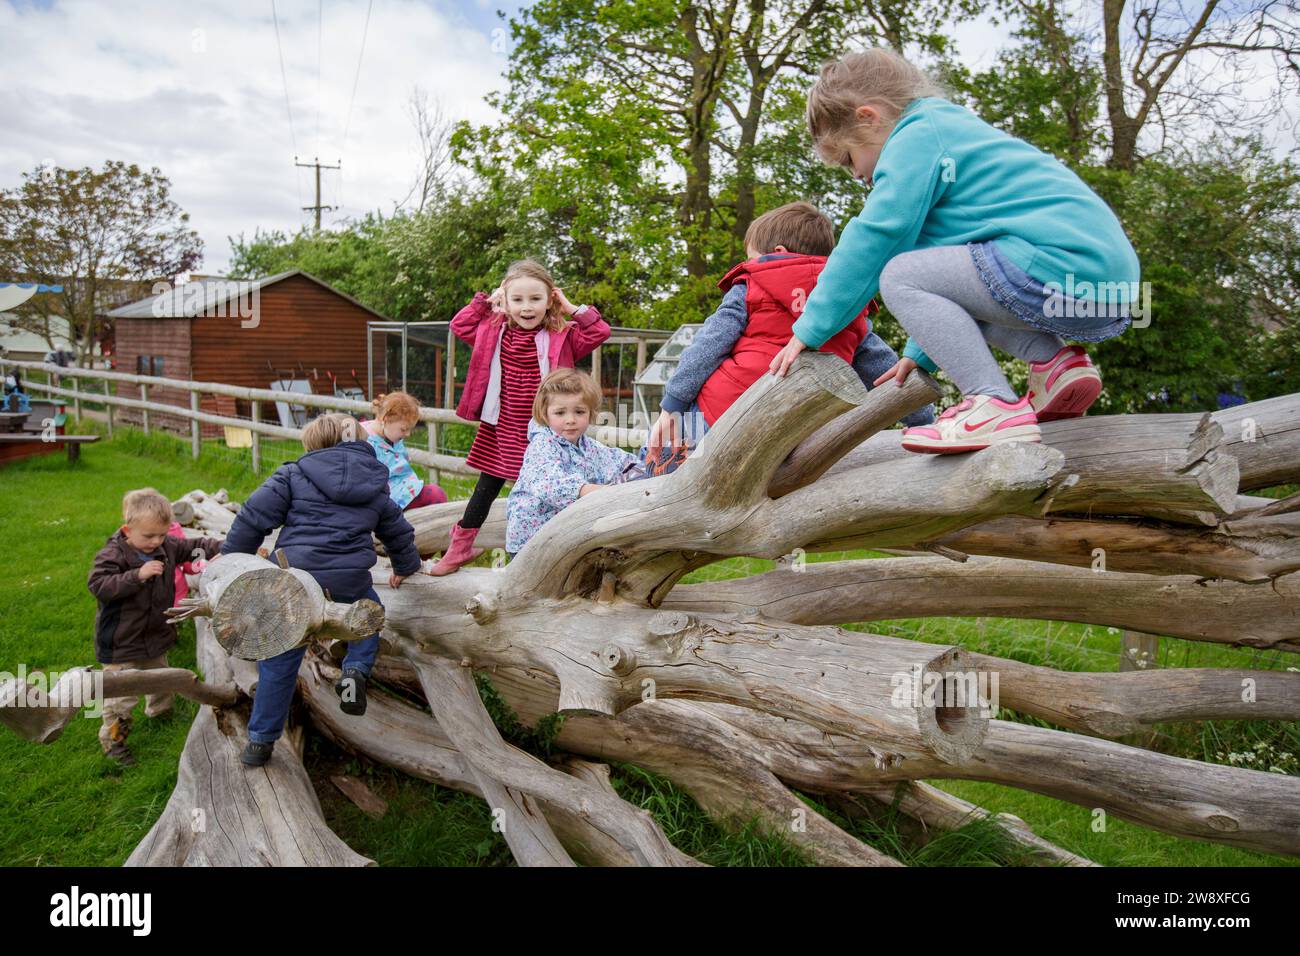 Children playing on a tree trunk in the grounds of an early years centre in the UK Stock Photo